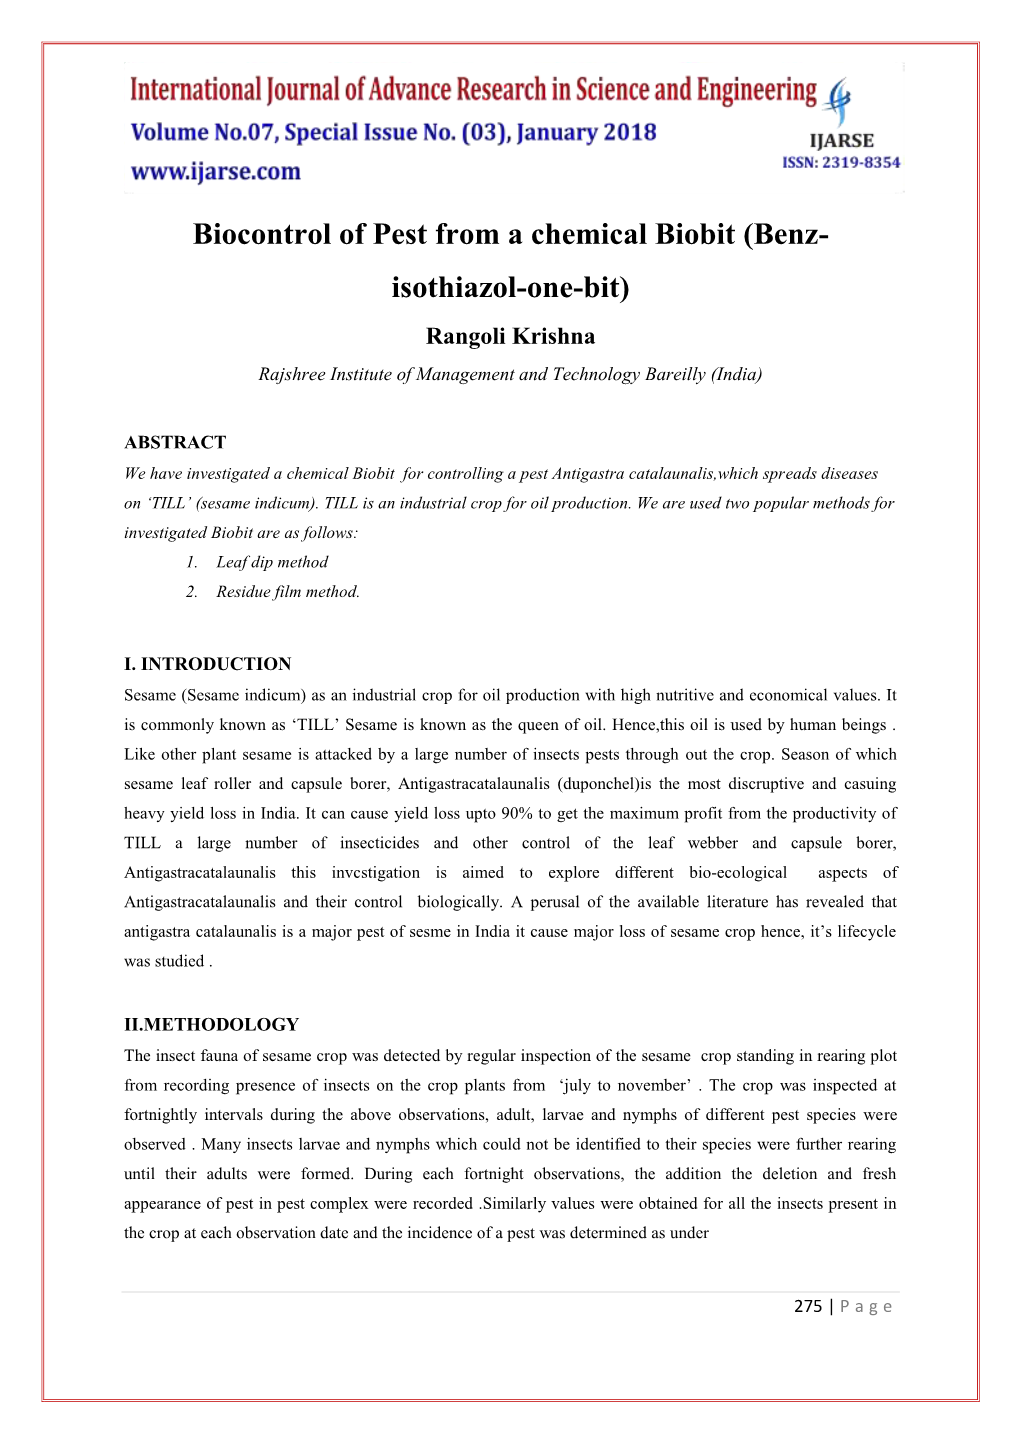 Biocontrol of Pest from a Chemical Biobit (Benz- Isothiazol-One-Bit) Rangoli Krishna Rajshree Institute of Management and Technology Bareilly (India)